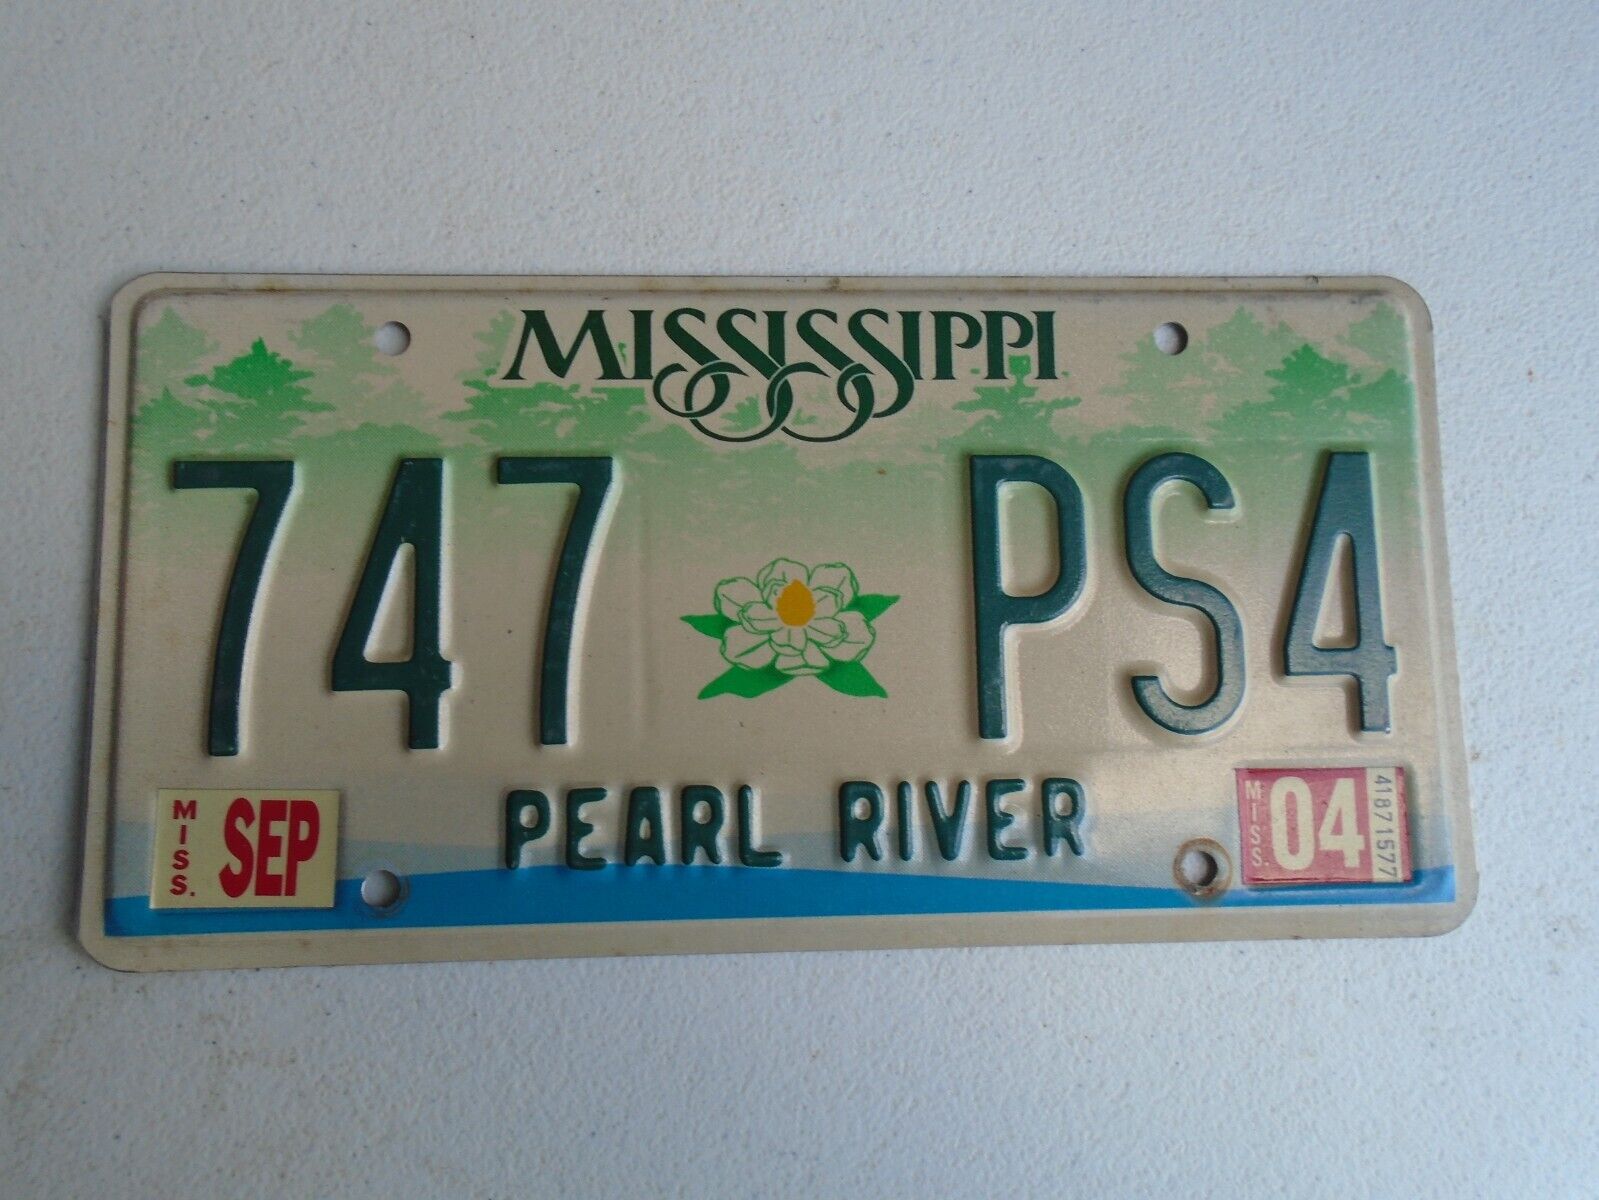 Mississippi License Plate Car Tag Magnolia Pearl River County Sep 2004 747 PS4